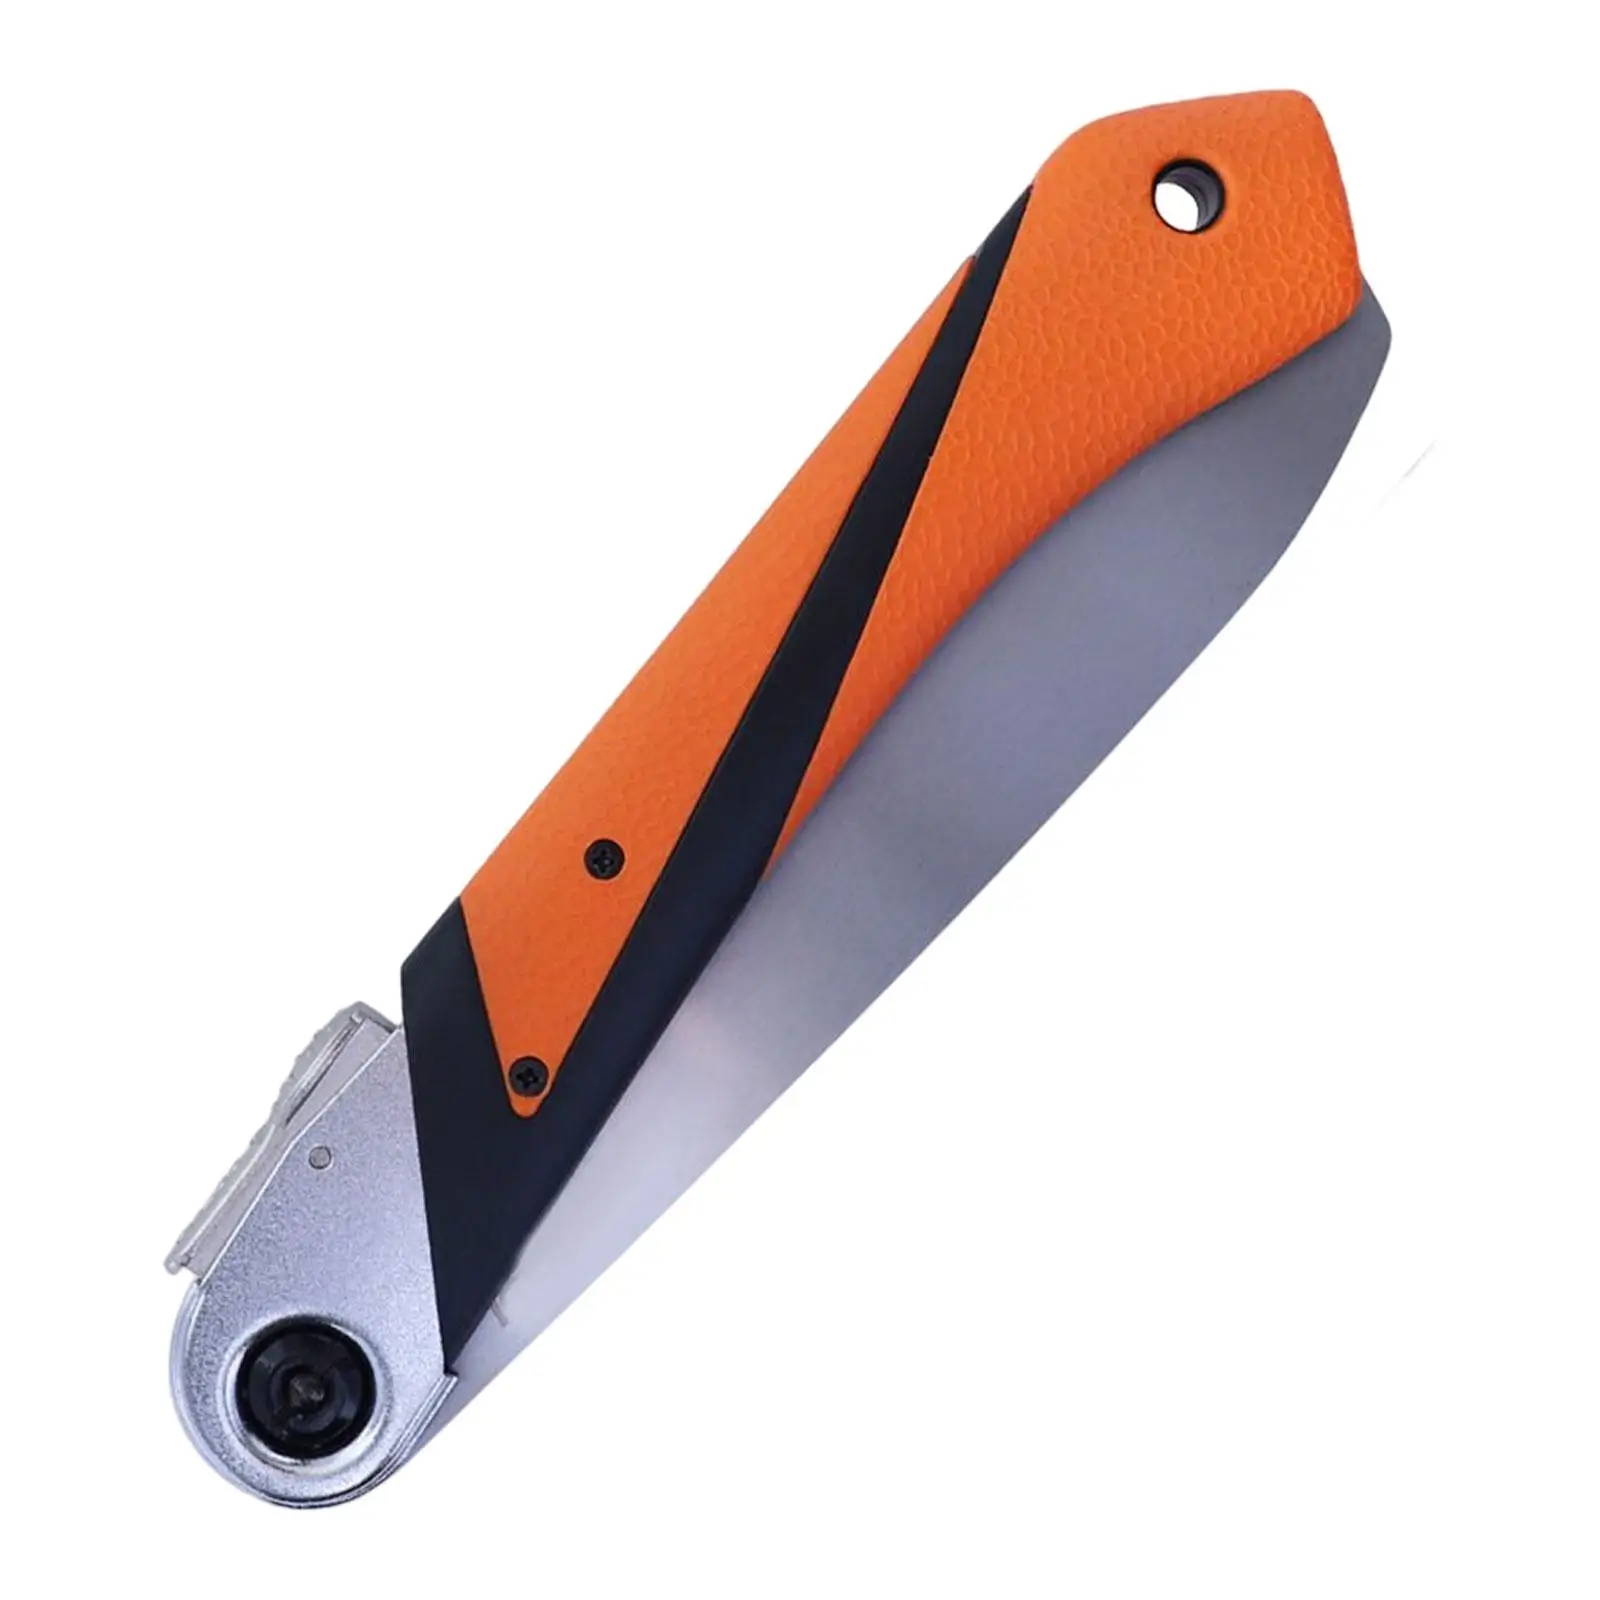 Folding Saw Quick Sawing Cutting Sturdy Three Sided Grinding Saw Hand Saw for Carpenter Garden Hunting Hiking Household